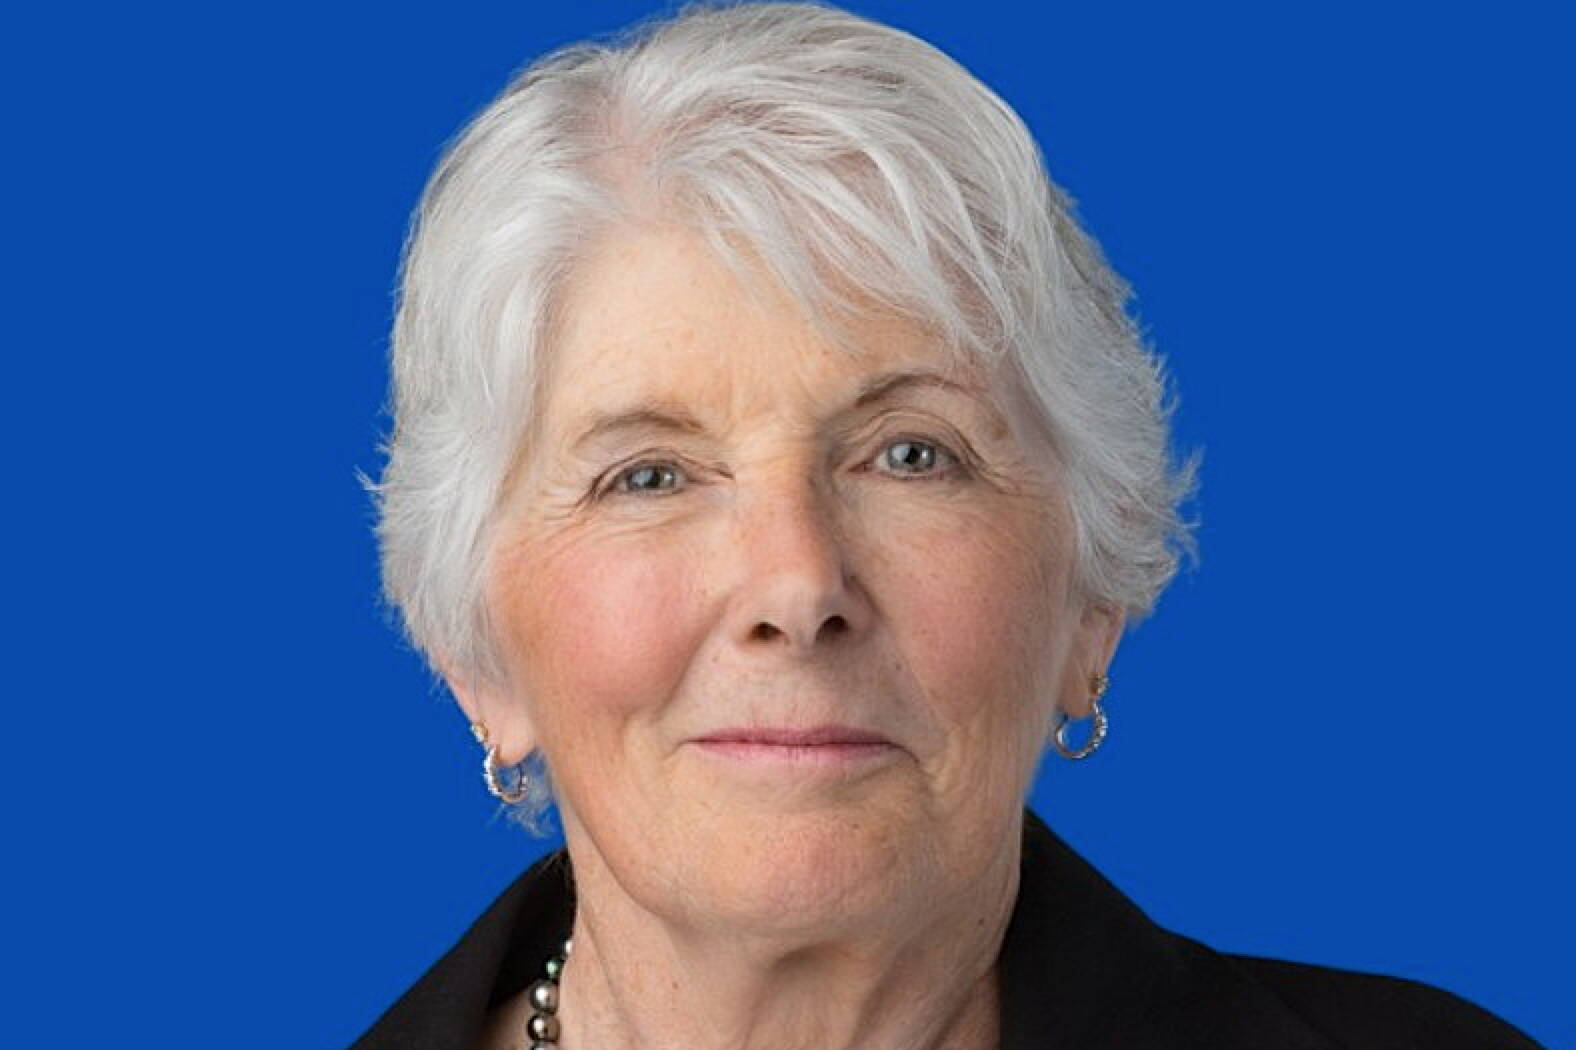 Pat Chesbro, the lone Democrat in the three-way race for one of Alaska’s U.S. Senate seats in the November general election, poses for her official campaign profile picture. (Chesbro For Alaska)